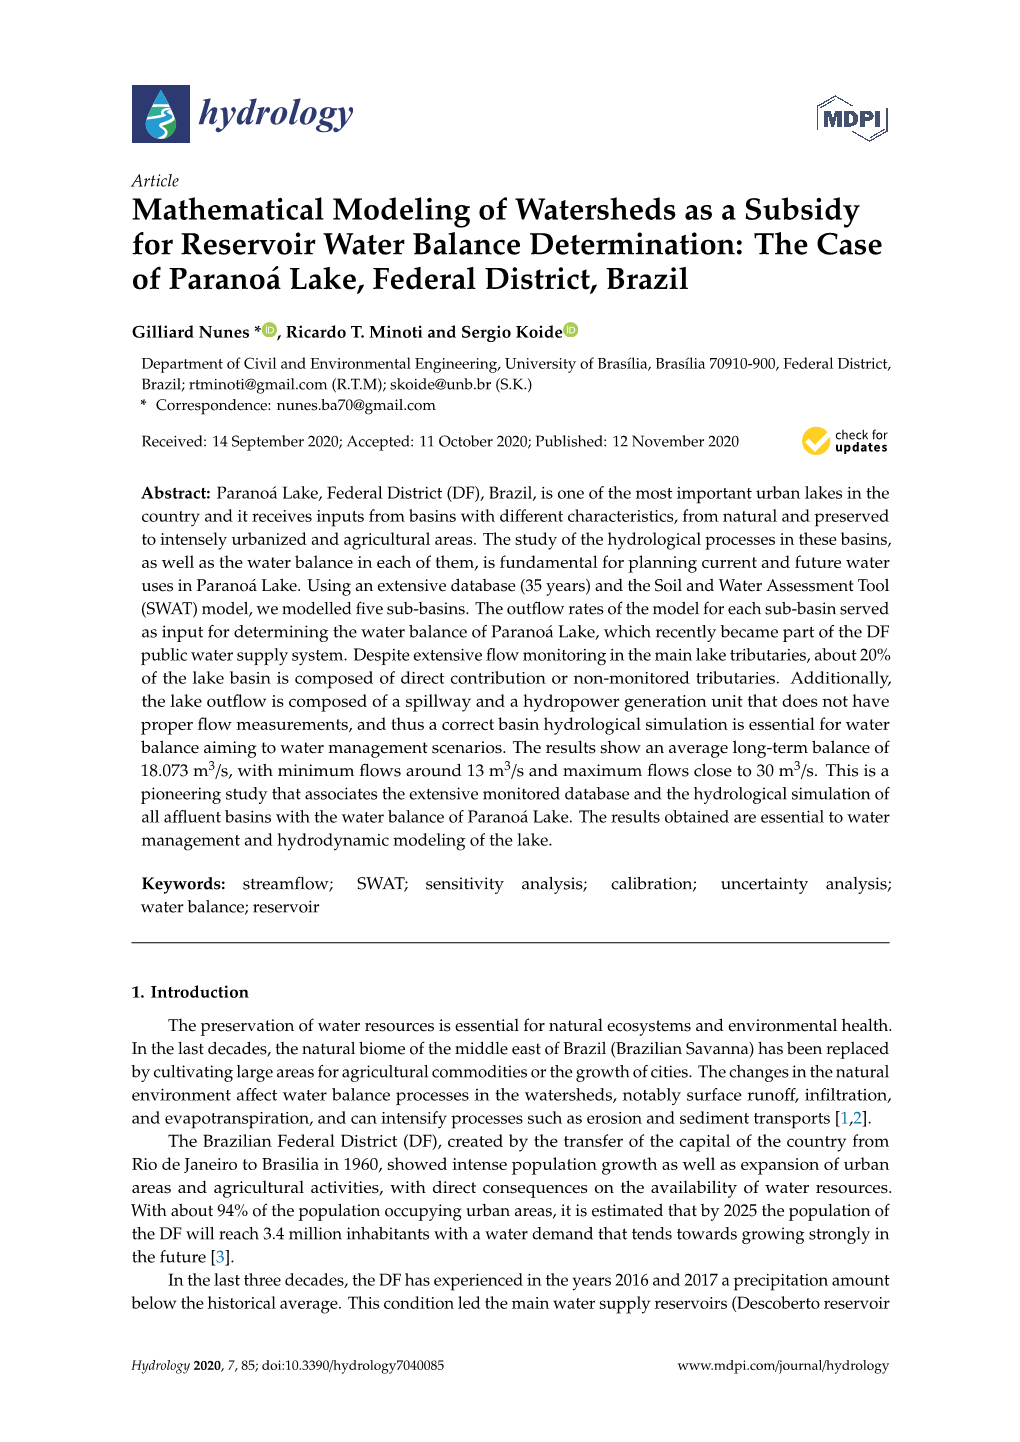 Mathematical Modeling of Watersheds As a Subsidy for Reservoir Water Balance Determination: the Case of Paranoá Lake, Federal District, Brazil